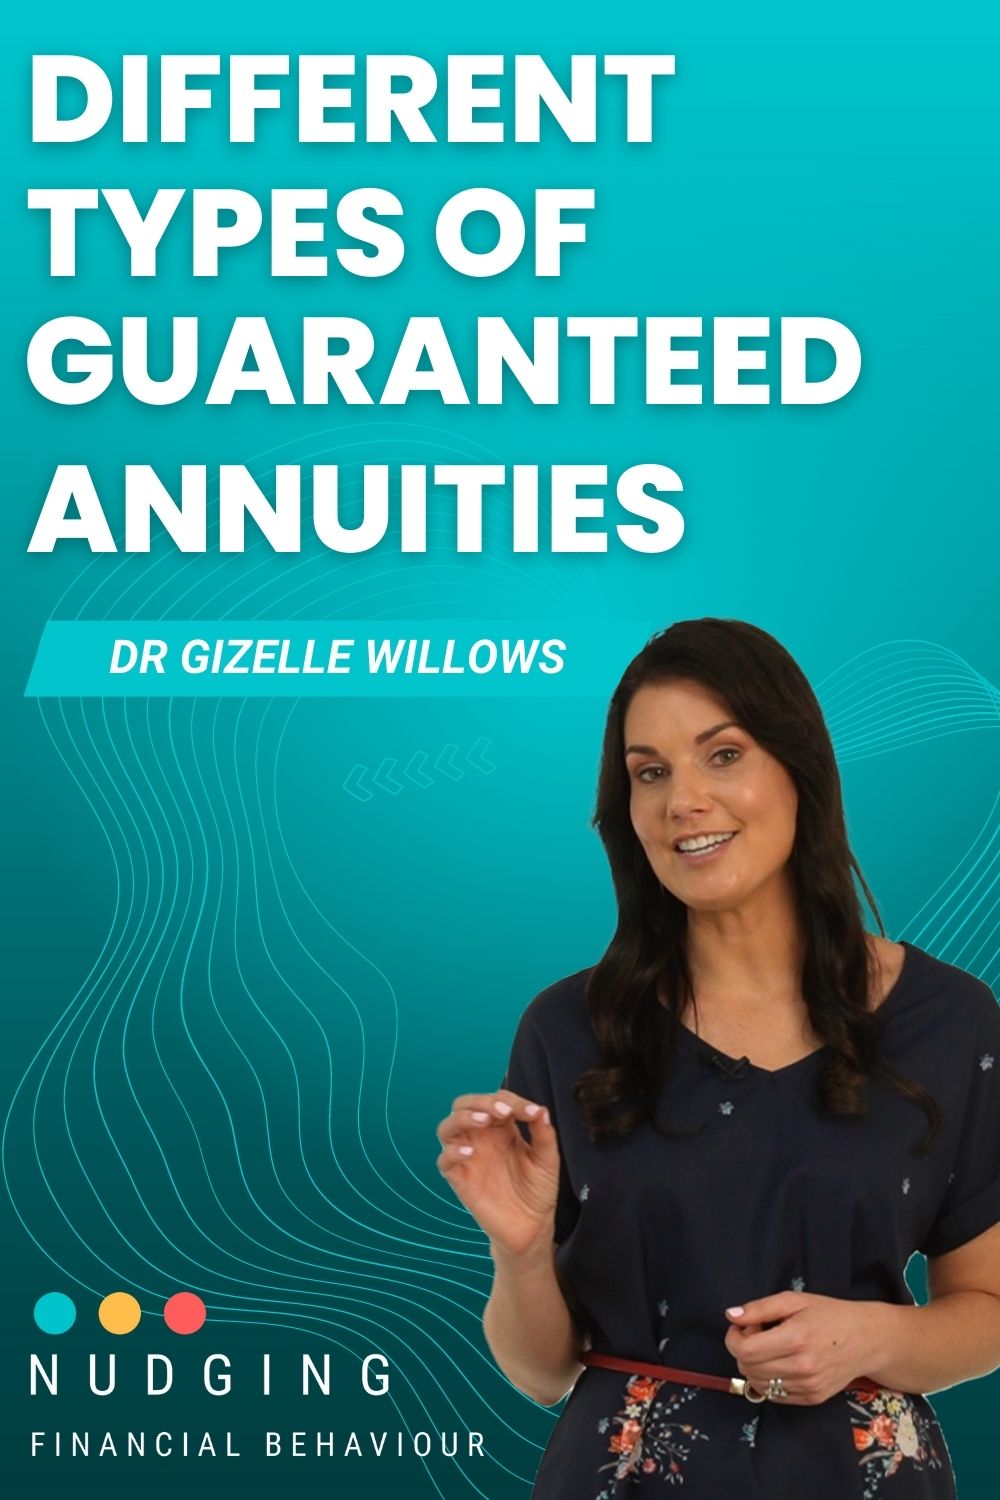 Different types of guaranteed annuities video